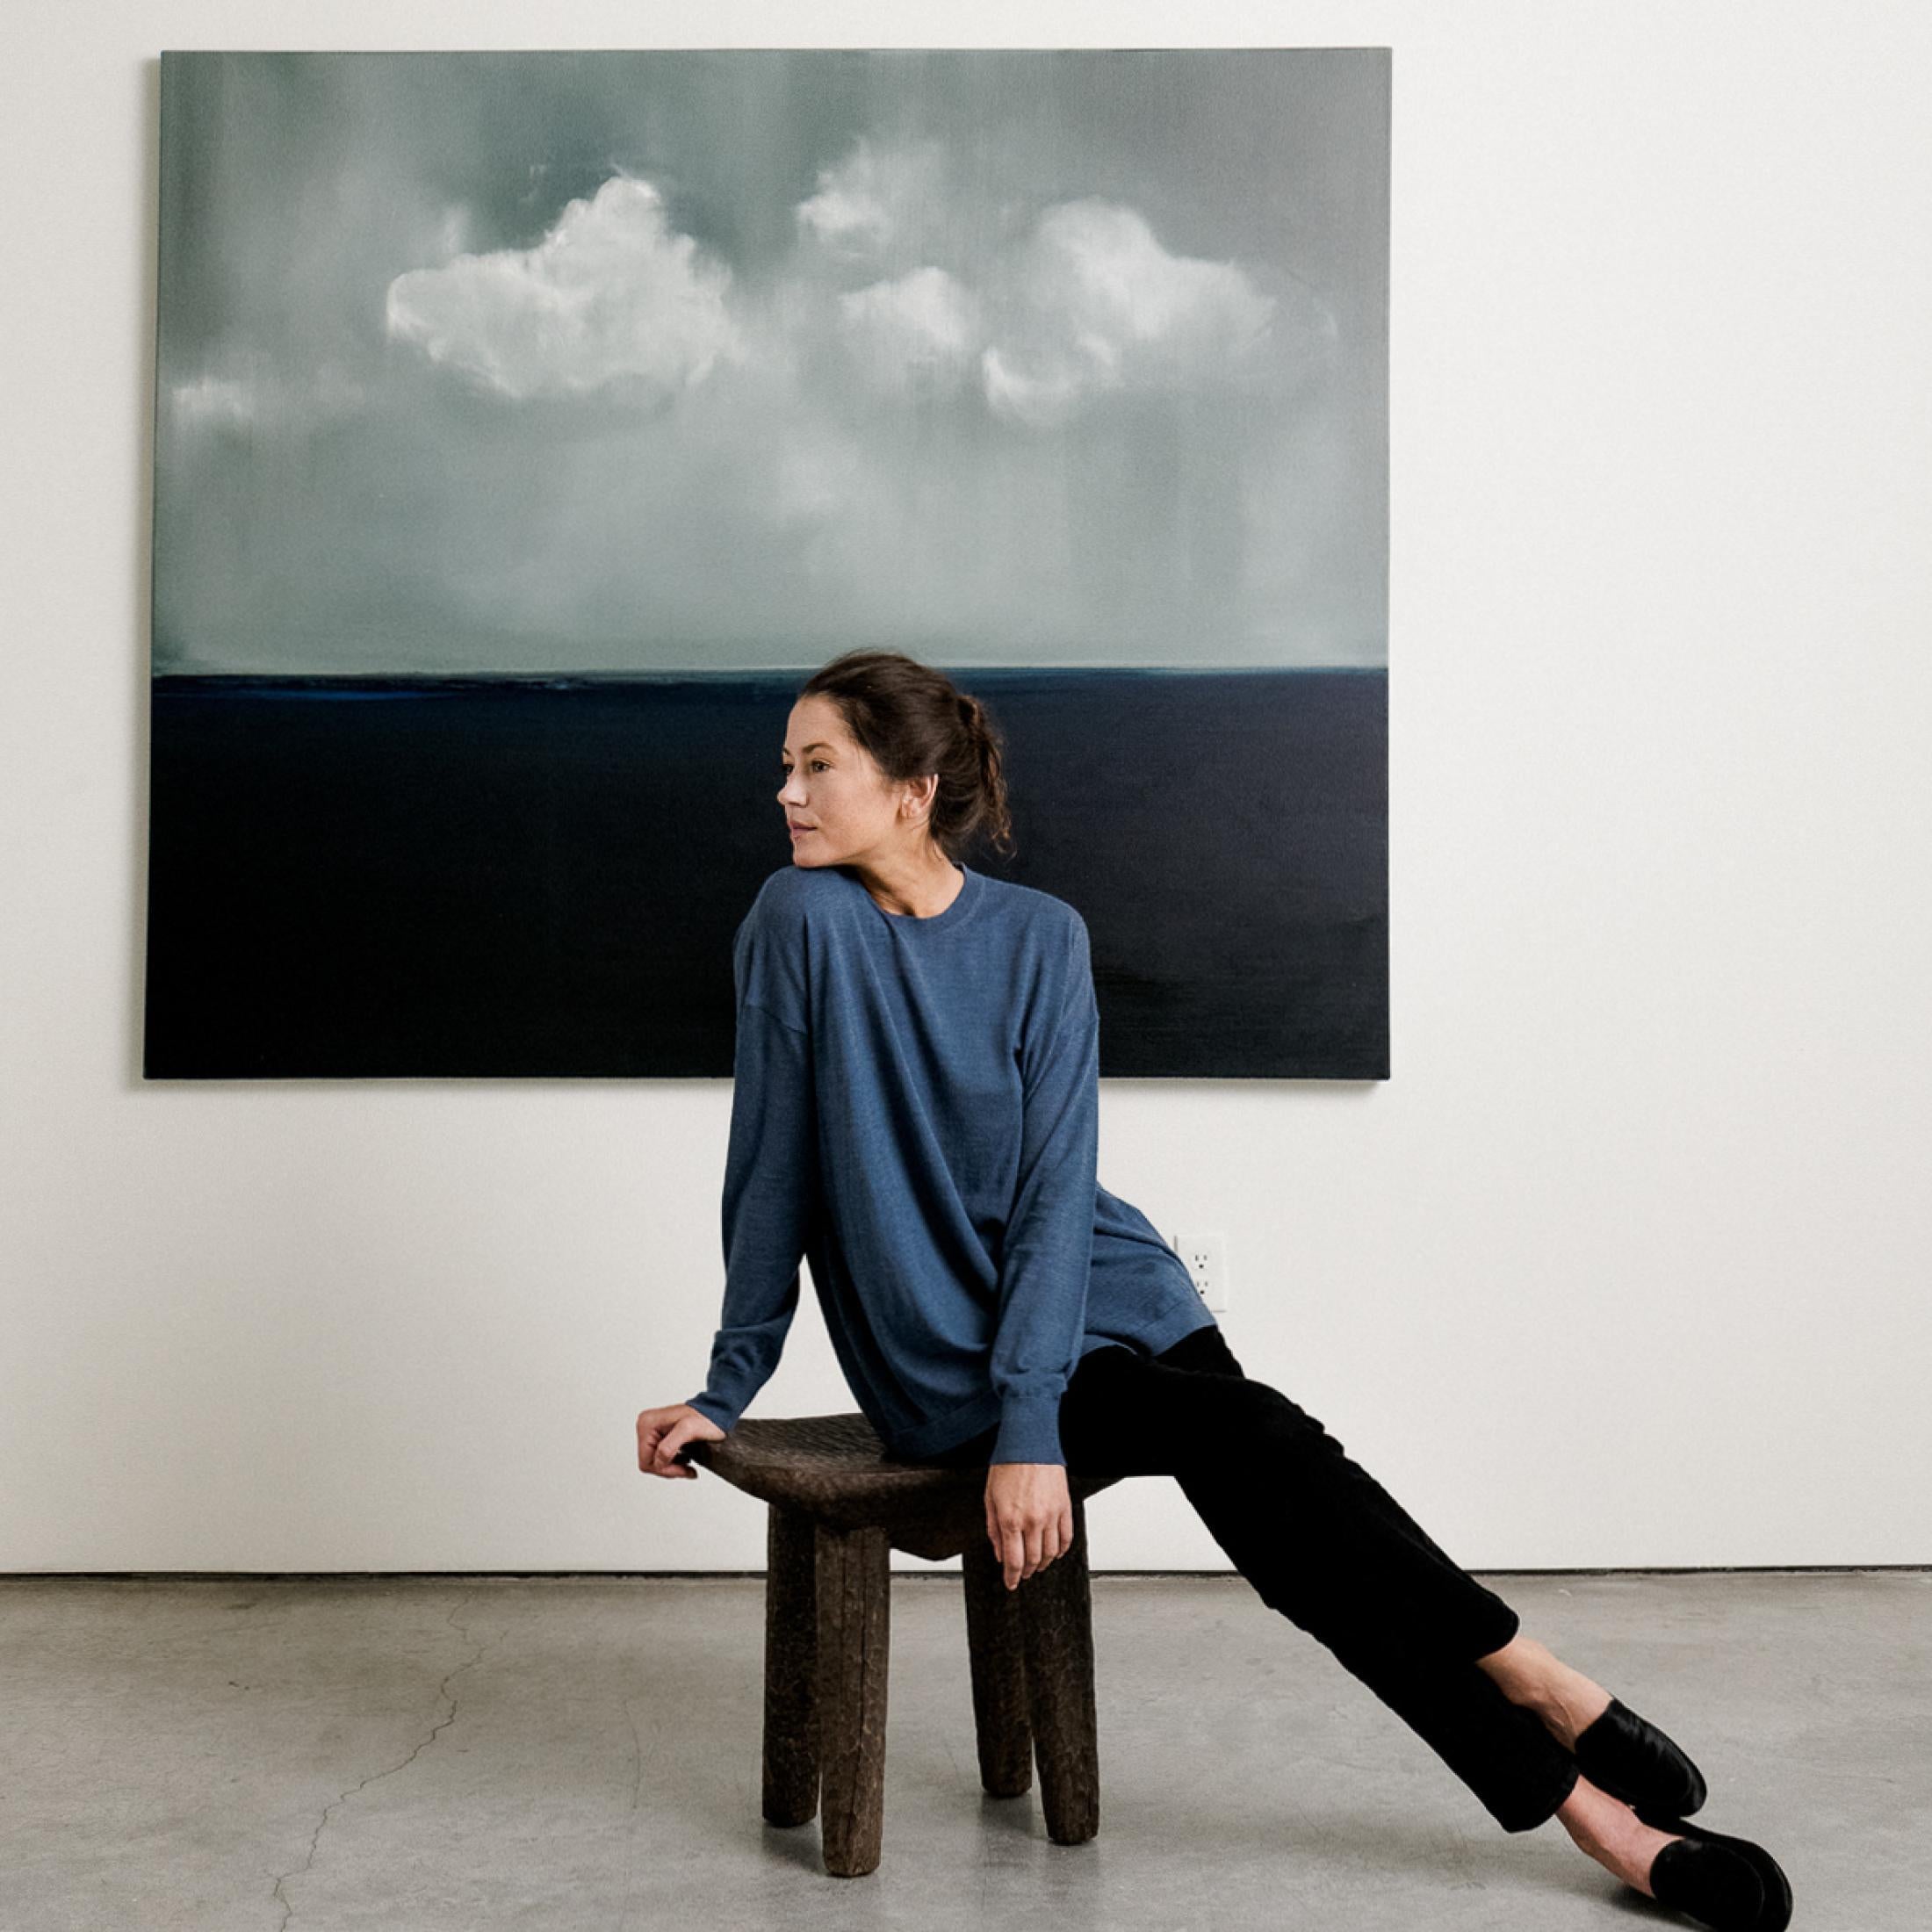 The Opening by artist Courtney Garrett is a contemporary landscape made with oil on canvas that measures 72 x 60 and is priced at $12,500.

Courtney J. Garrett has created a minimal yet sophisticated approach to capturing inspiring images of storms,